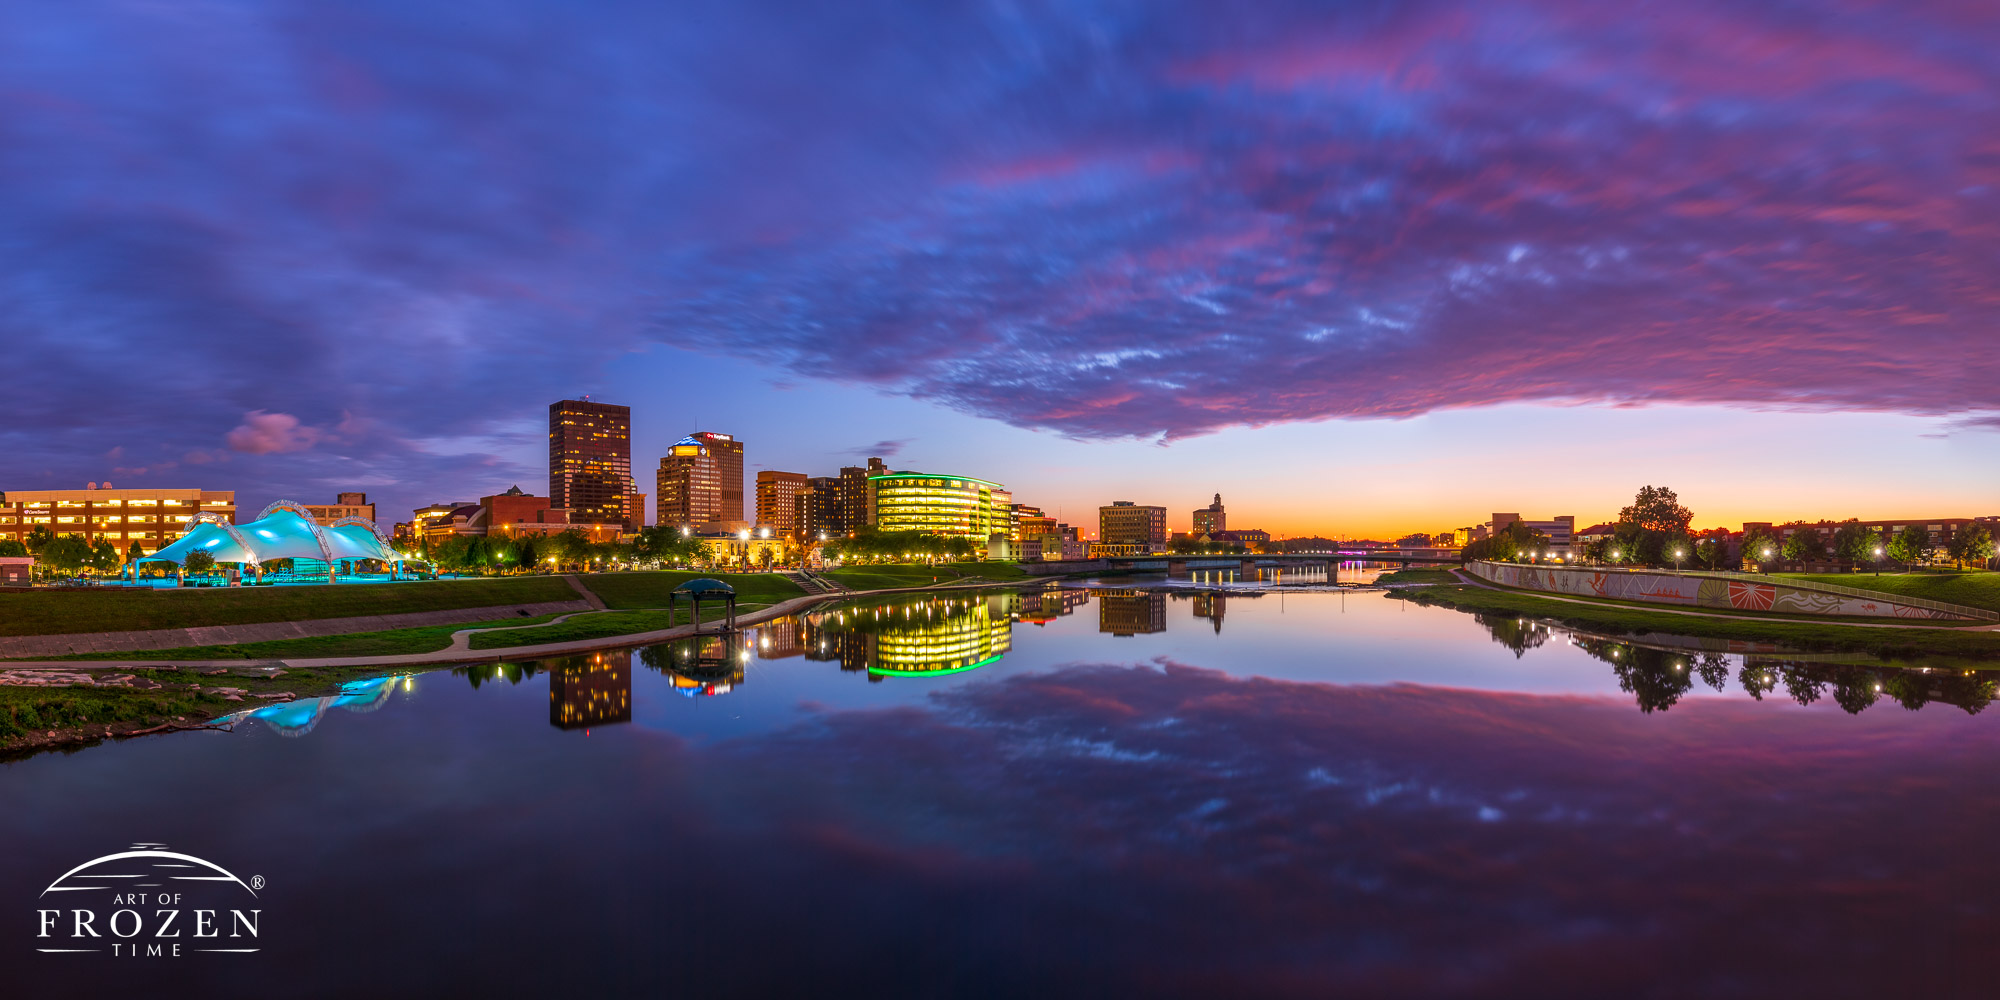 Dayton Skyline panorama at twilight as the Miami River reflects the city lights and pink and purple clouds